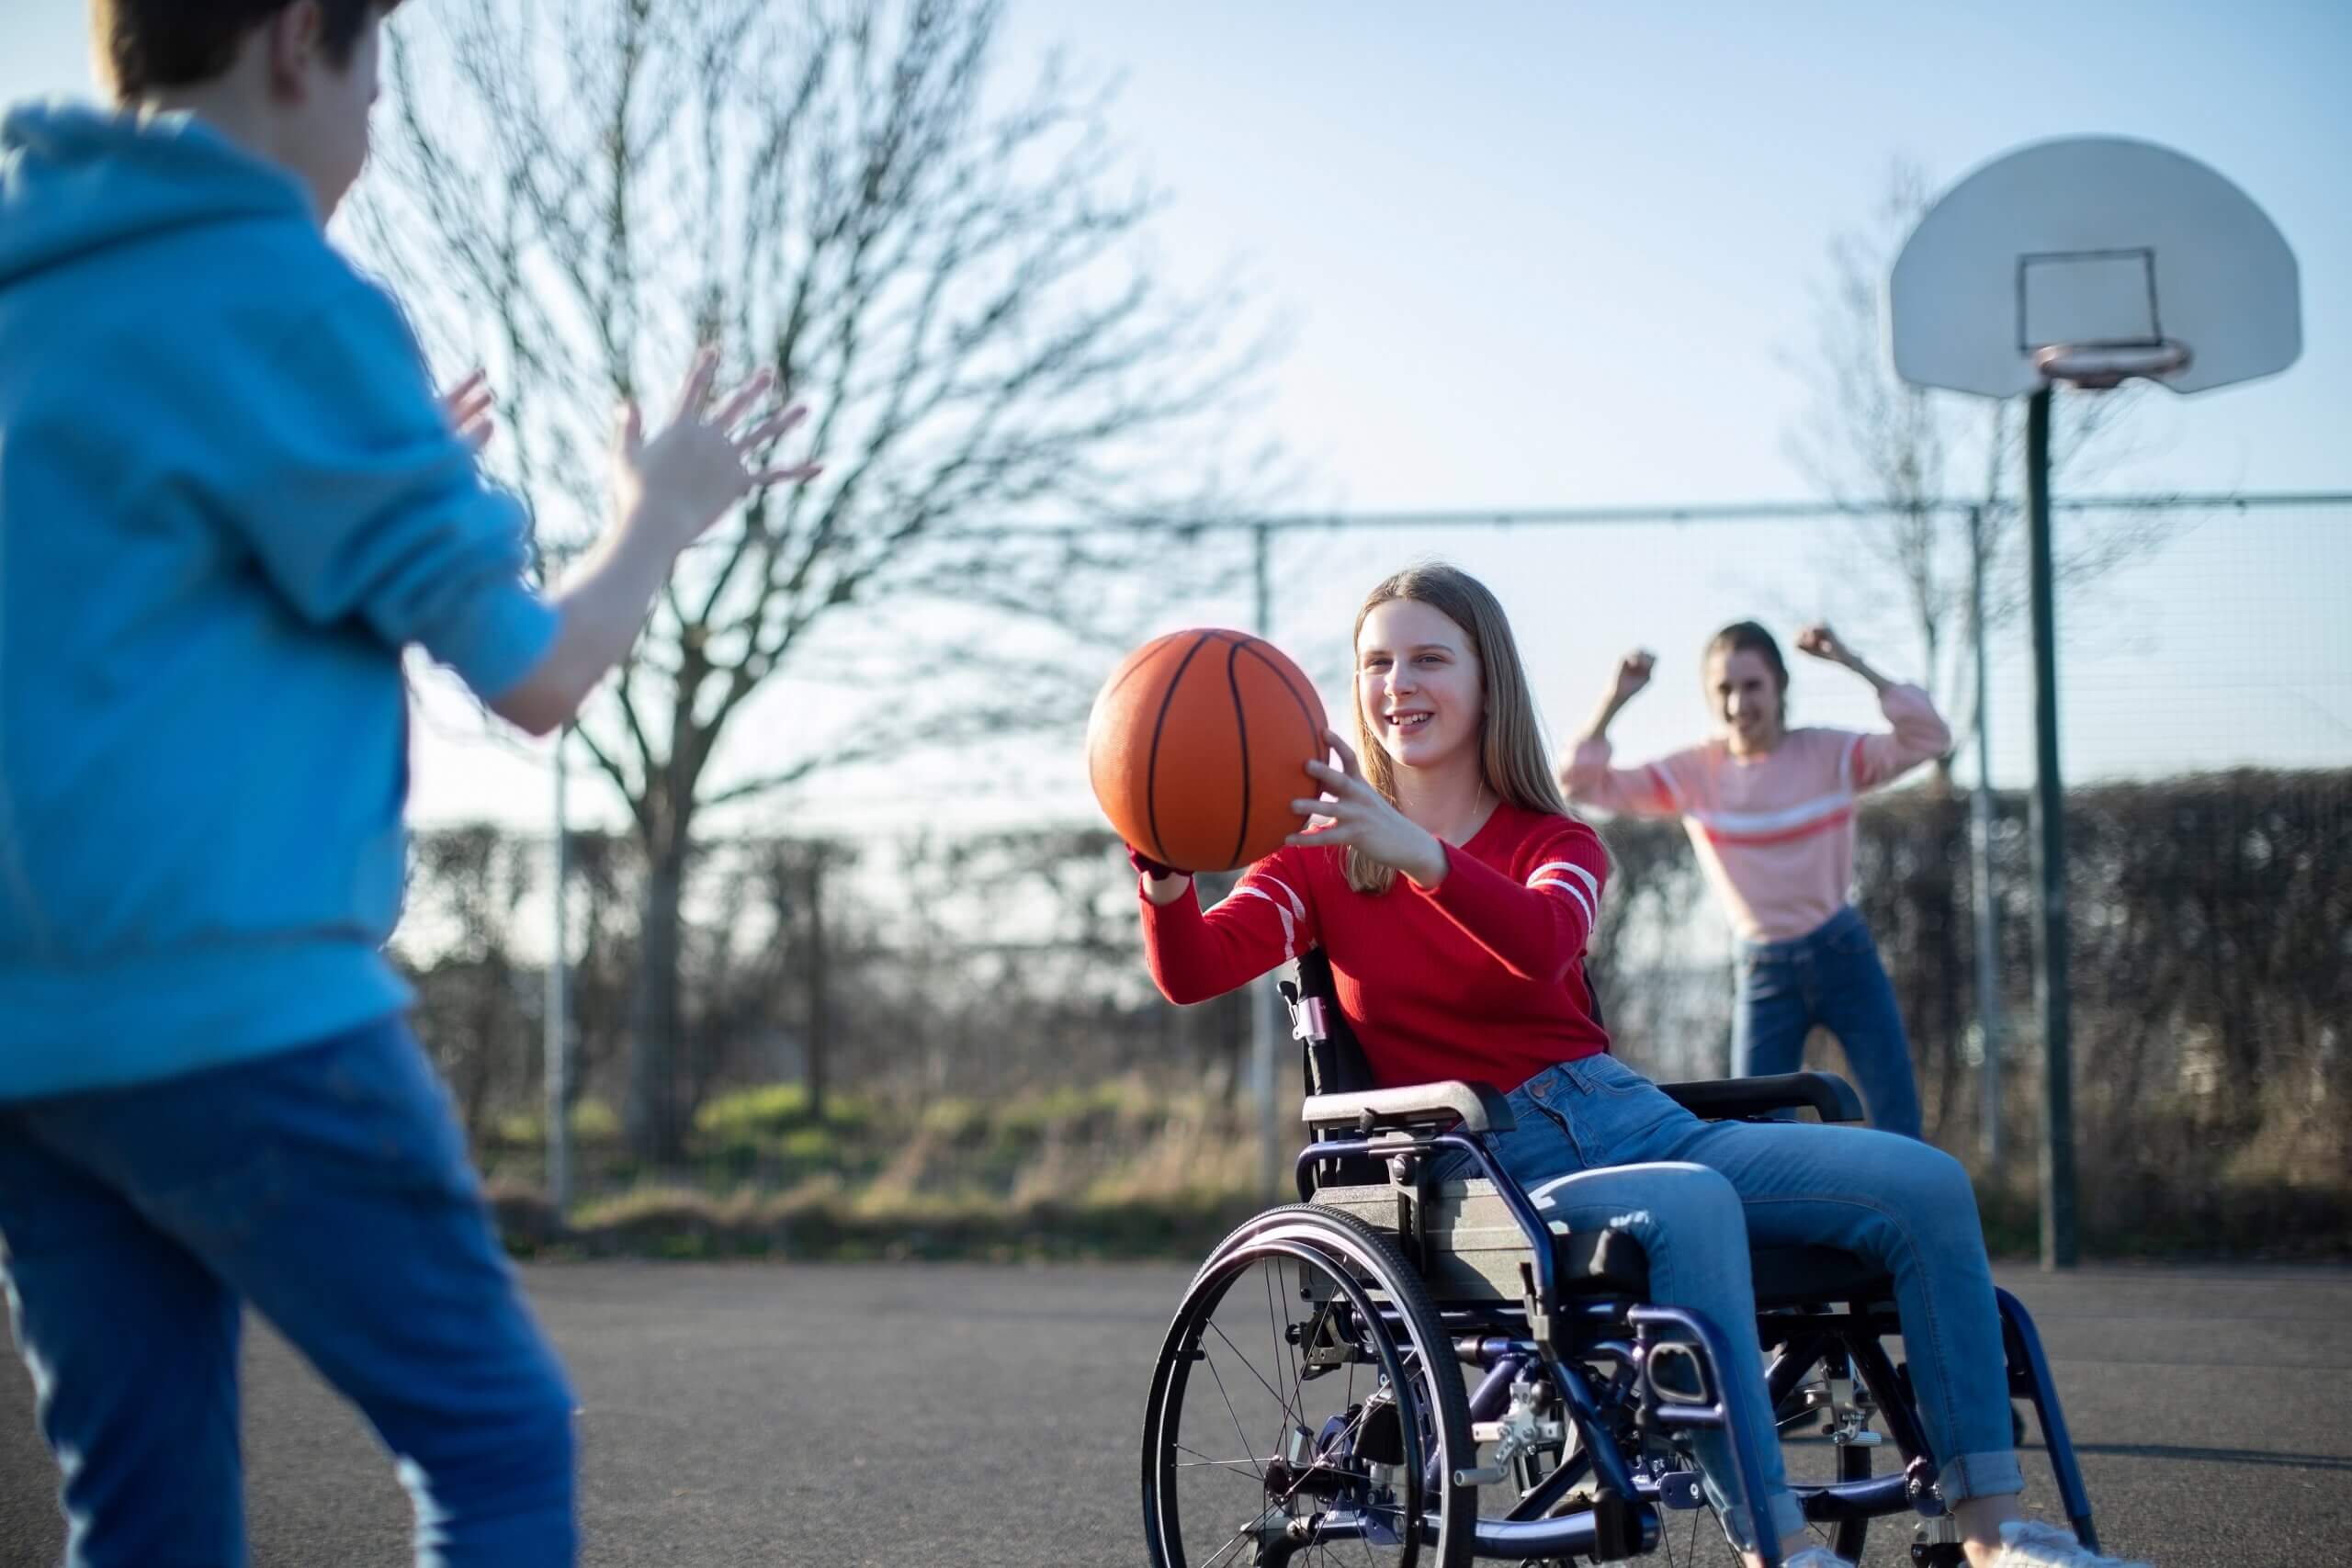 Several teens playing basketball, one of whom is using a wheelchair.